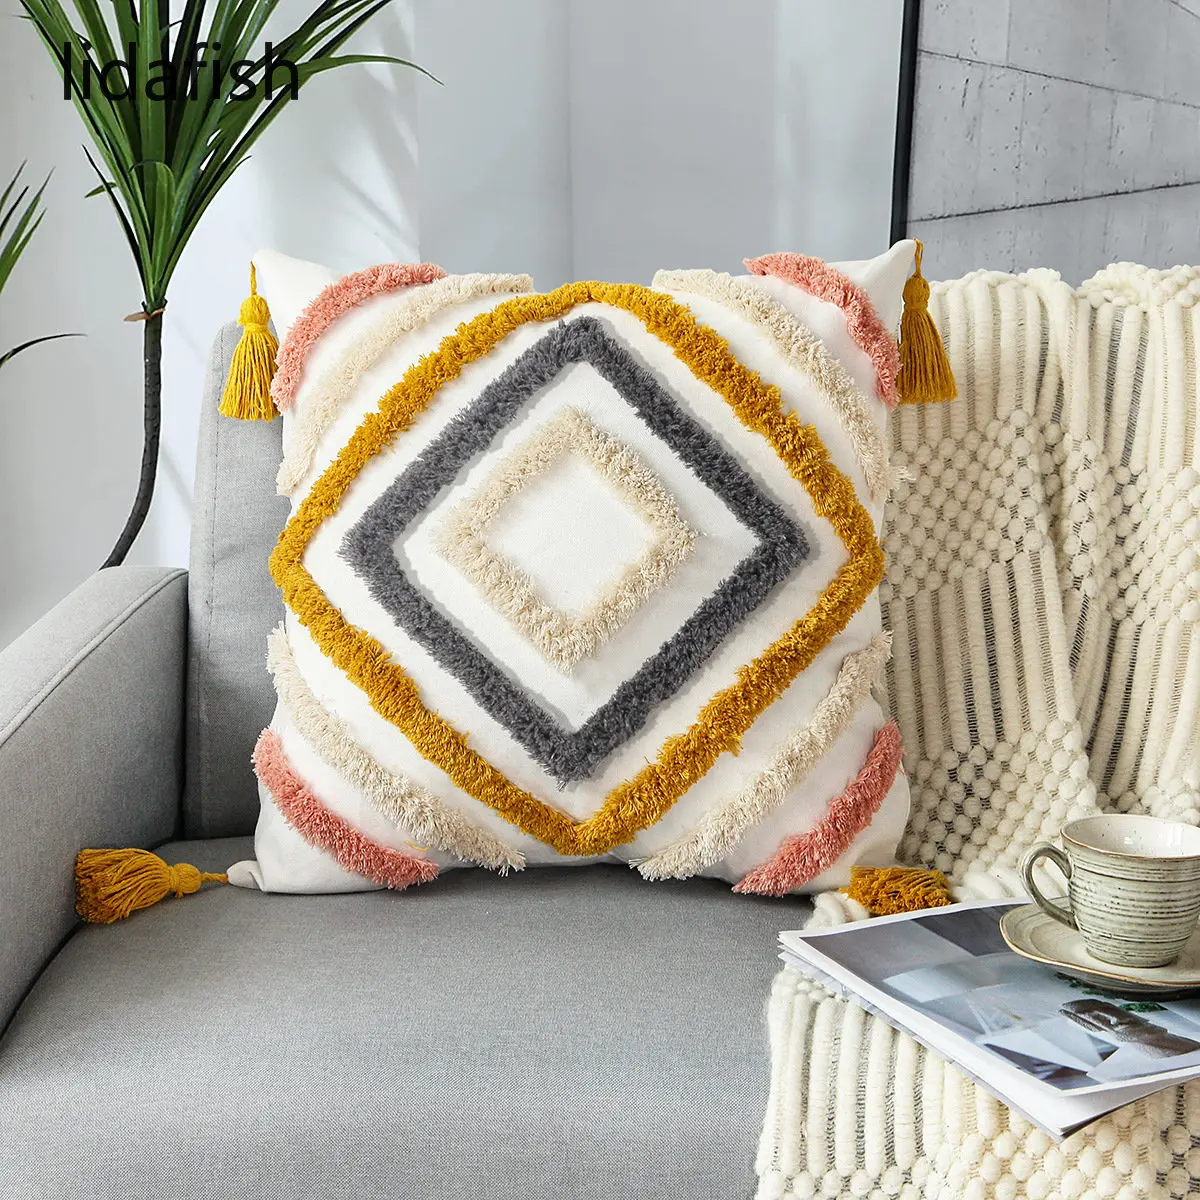 

Simple 45*45cm Soft Colorful Cotton Sofa Cushion Cover Moroccan Style Home Decorate Pillowcase With Fringe